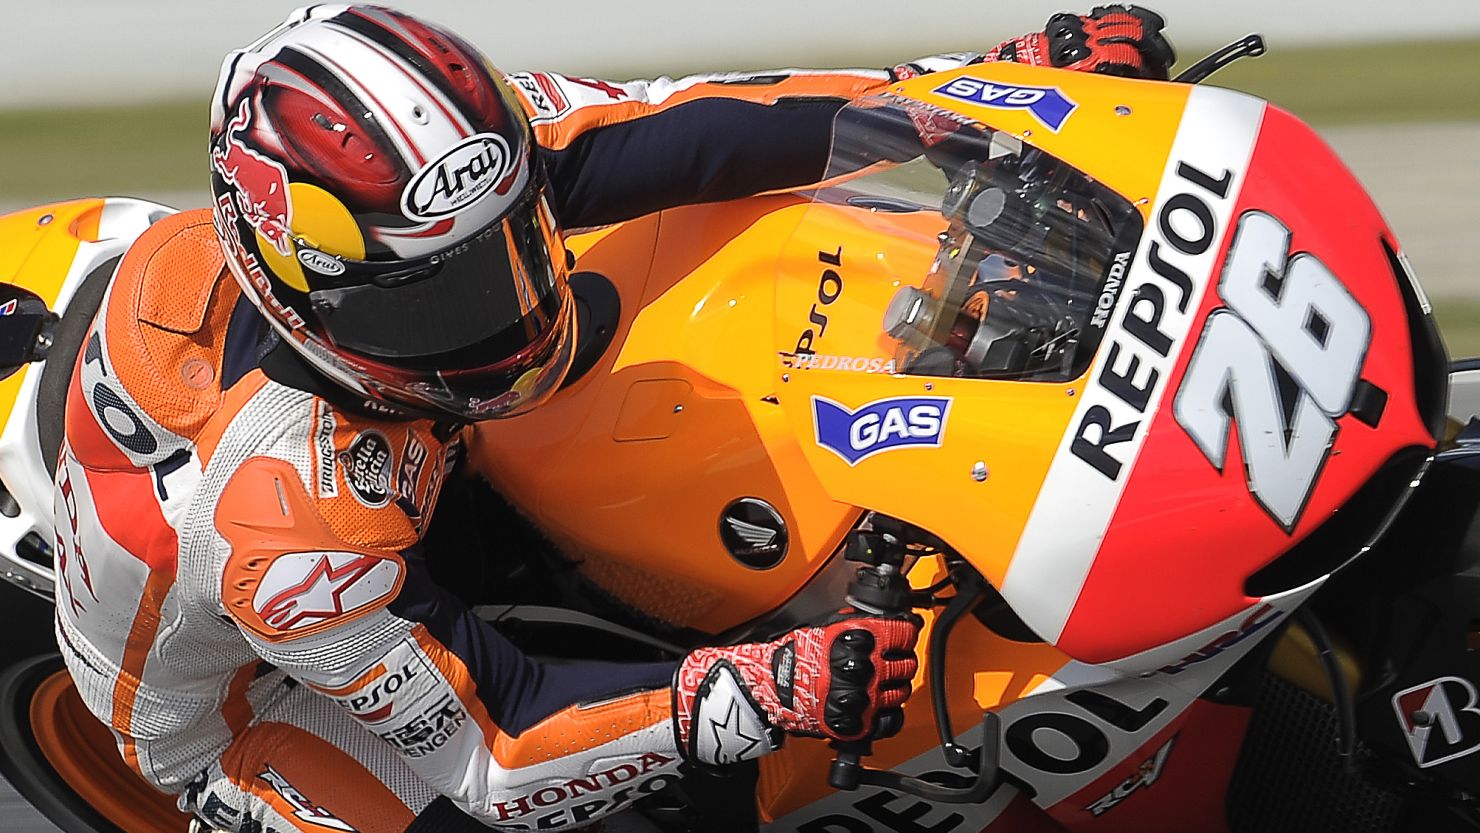 Championship leader Dani Pedrosa recorded the fastest lap ever at Montmelo in Spain. 